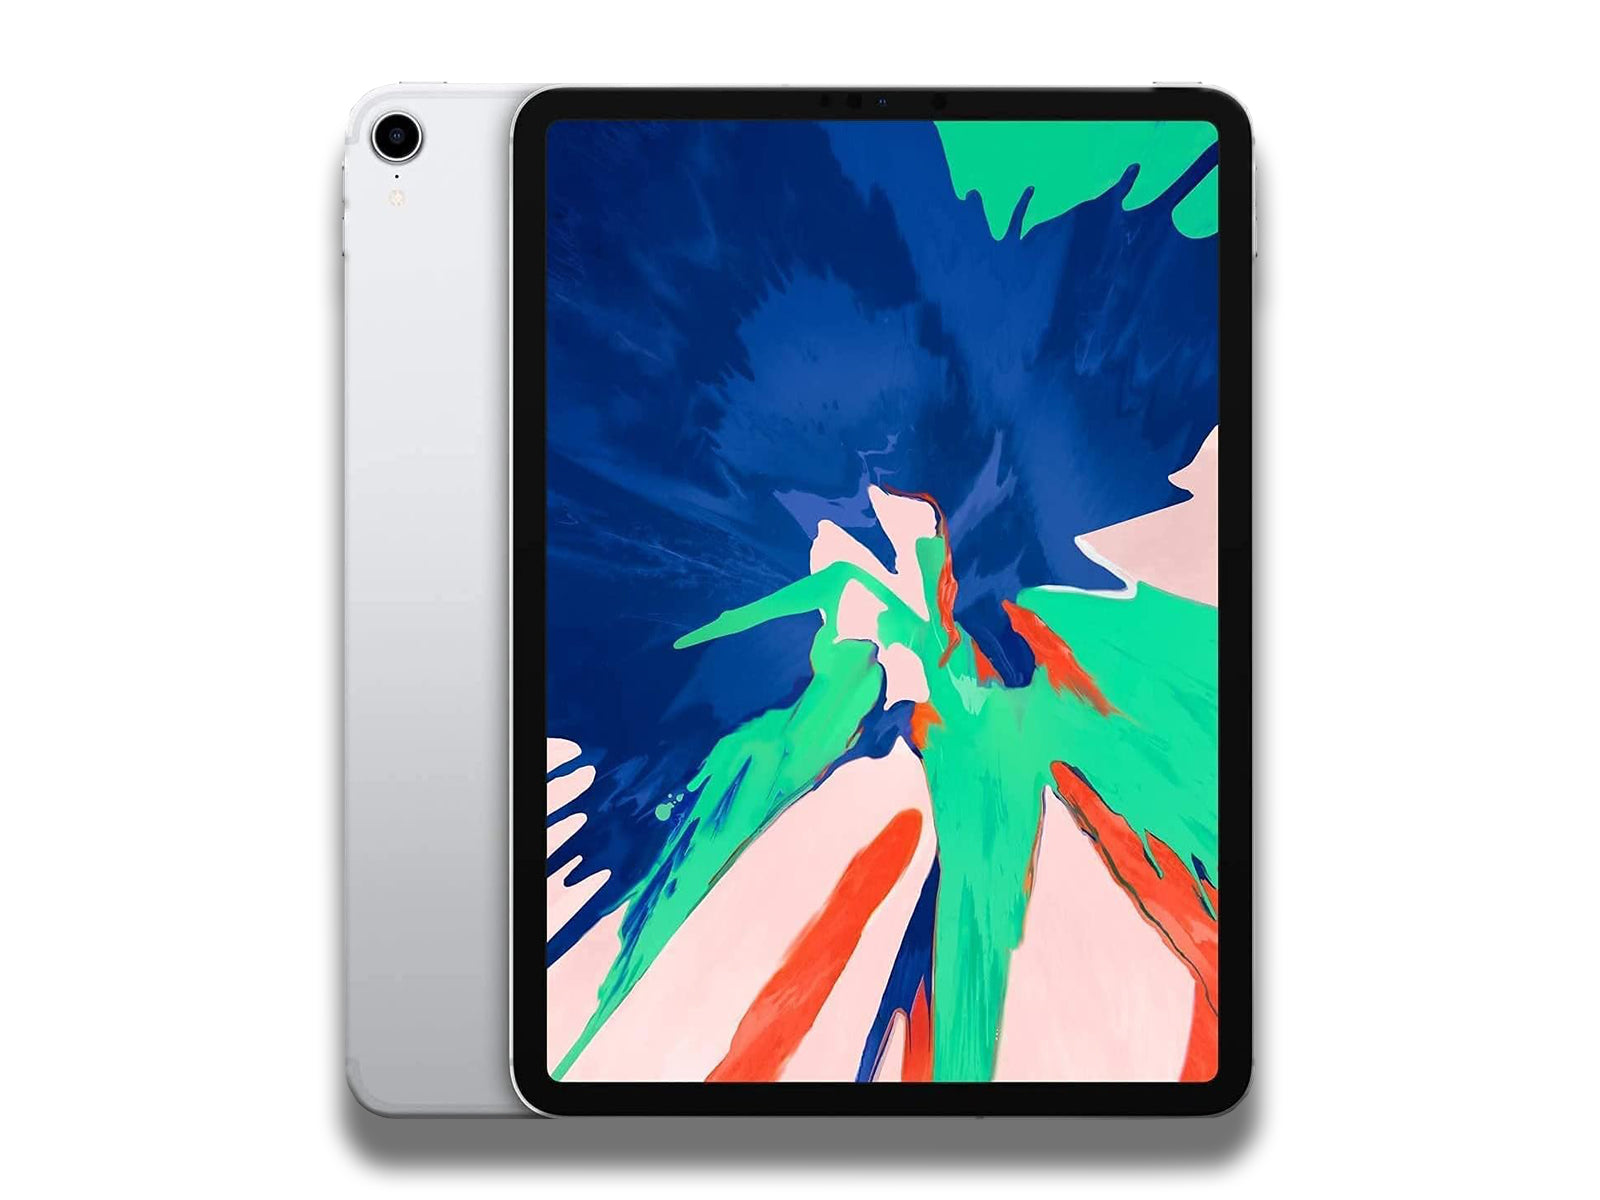 Image shows the front and back of the silver Apple iPad Pro 11-inch 1st Generation 